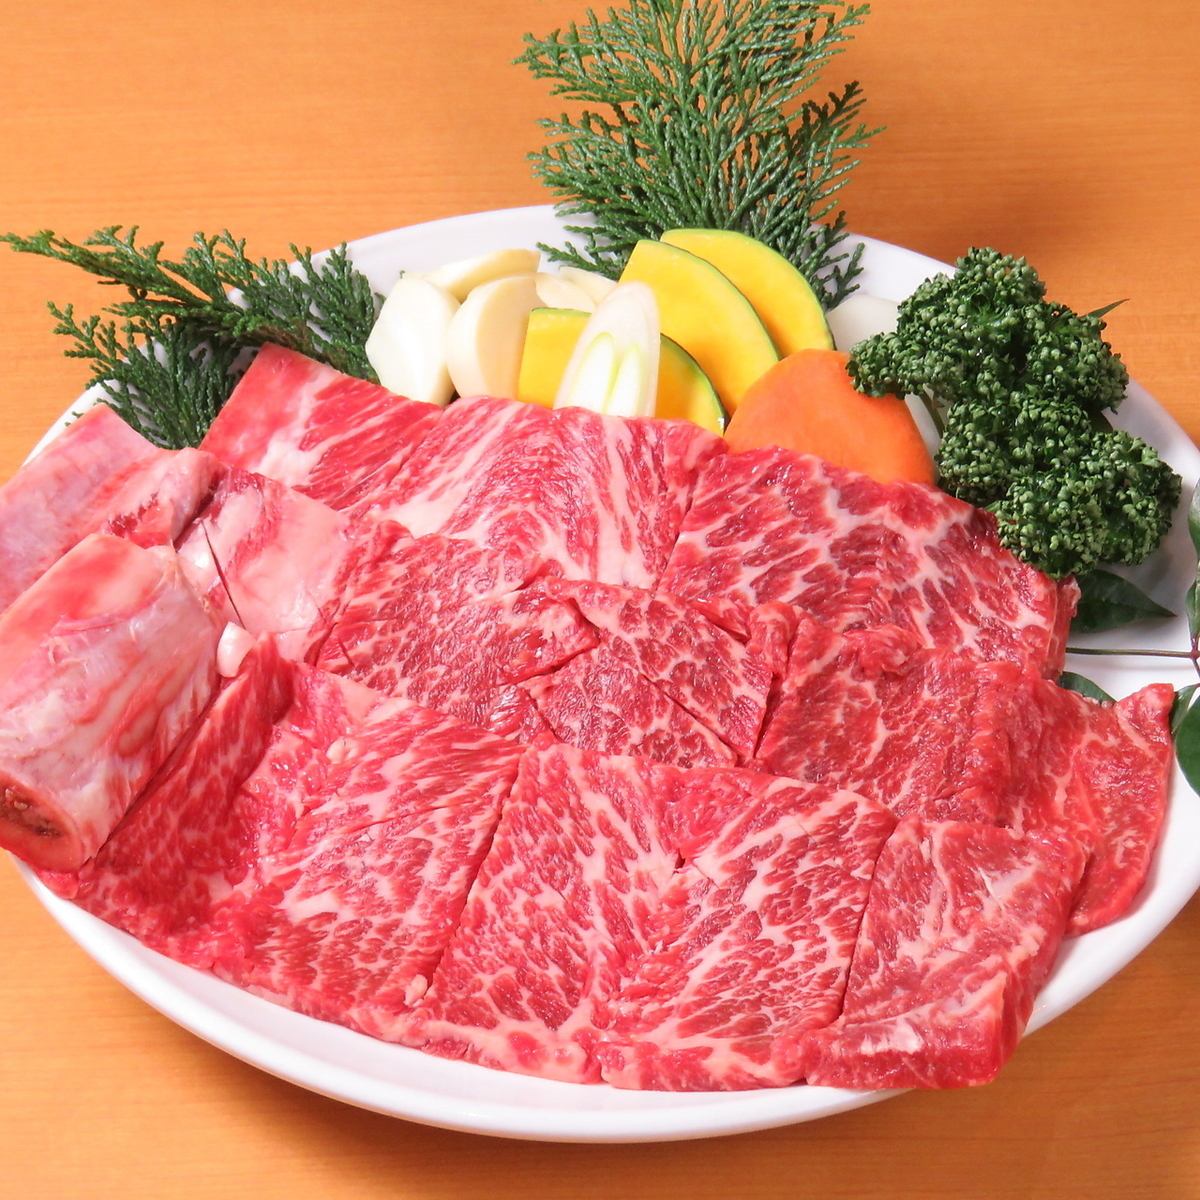 You can enjoy delicious meat with yakiniku ◎